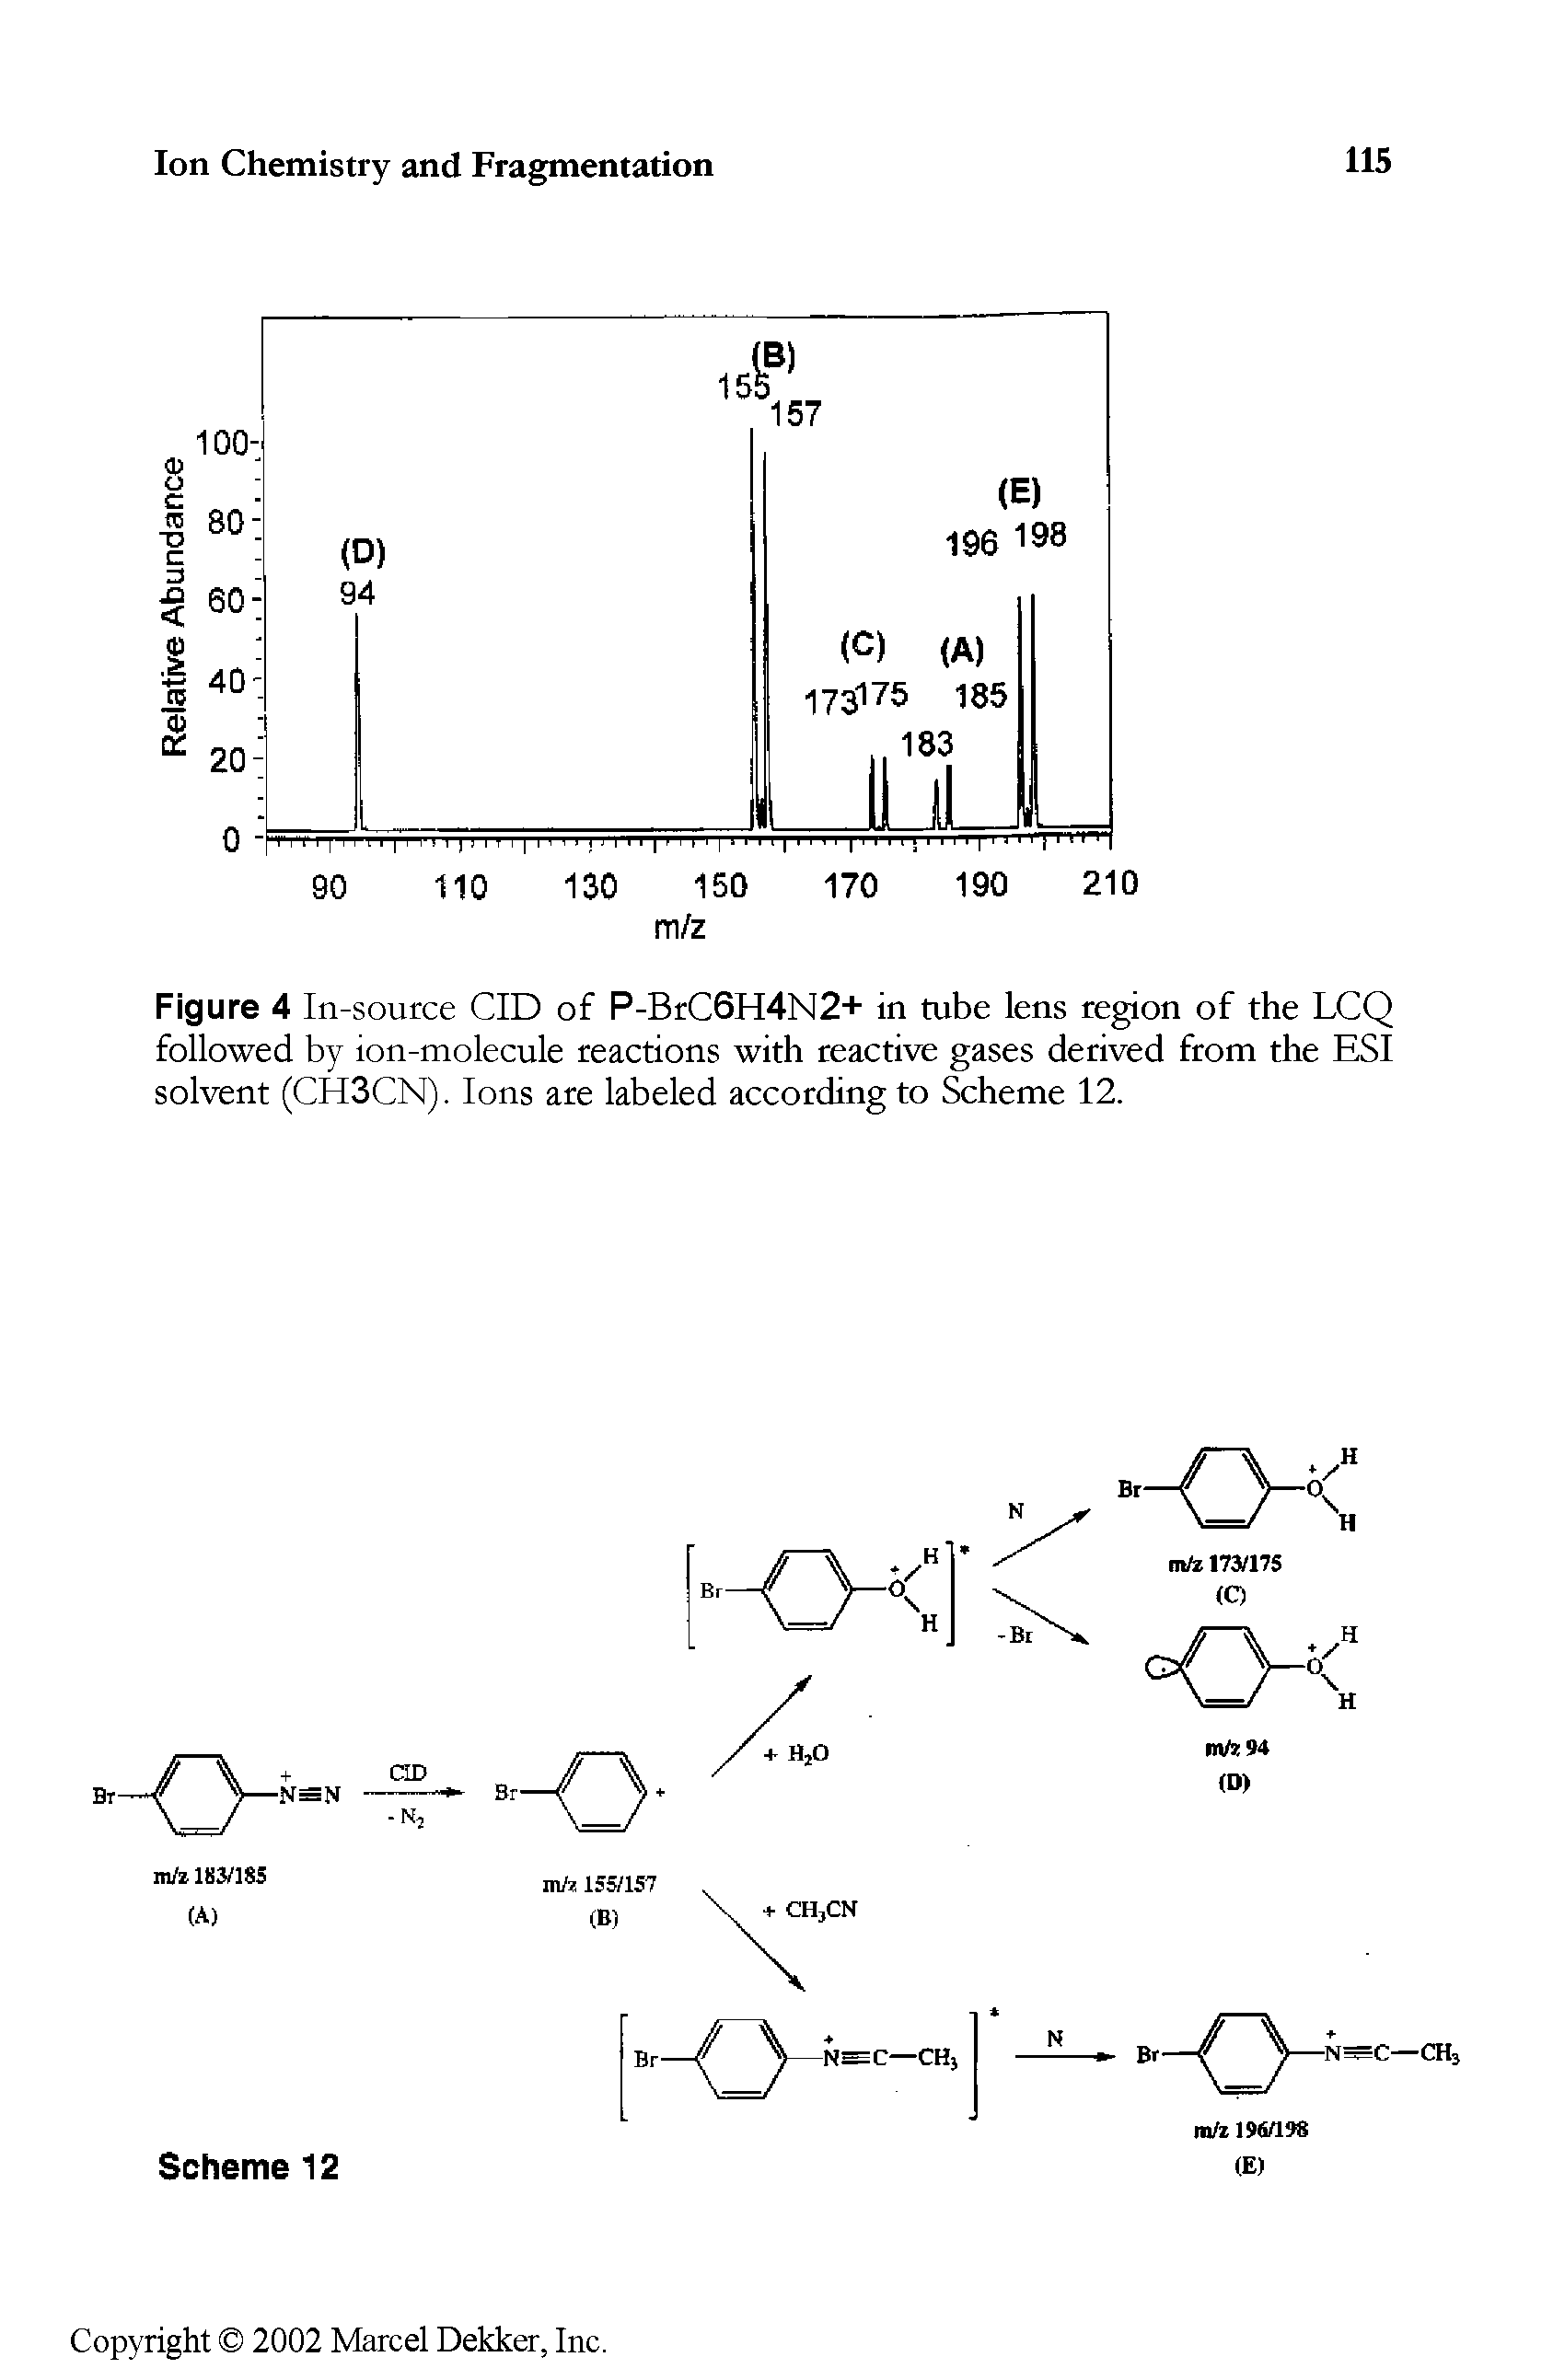 Figure 4 In-source CID of P-BrC6H4N2+ in tube lens region of the LCQ followed by ion-molecule reactions with reactive gases derived from the ESI solvent (CH3CN). Ions are labeled according to Scheme 12.